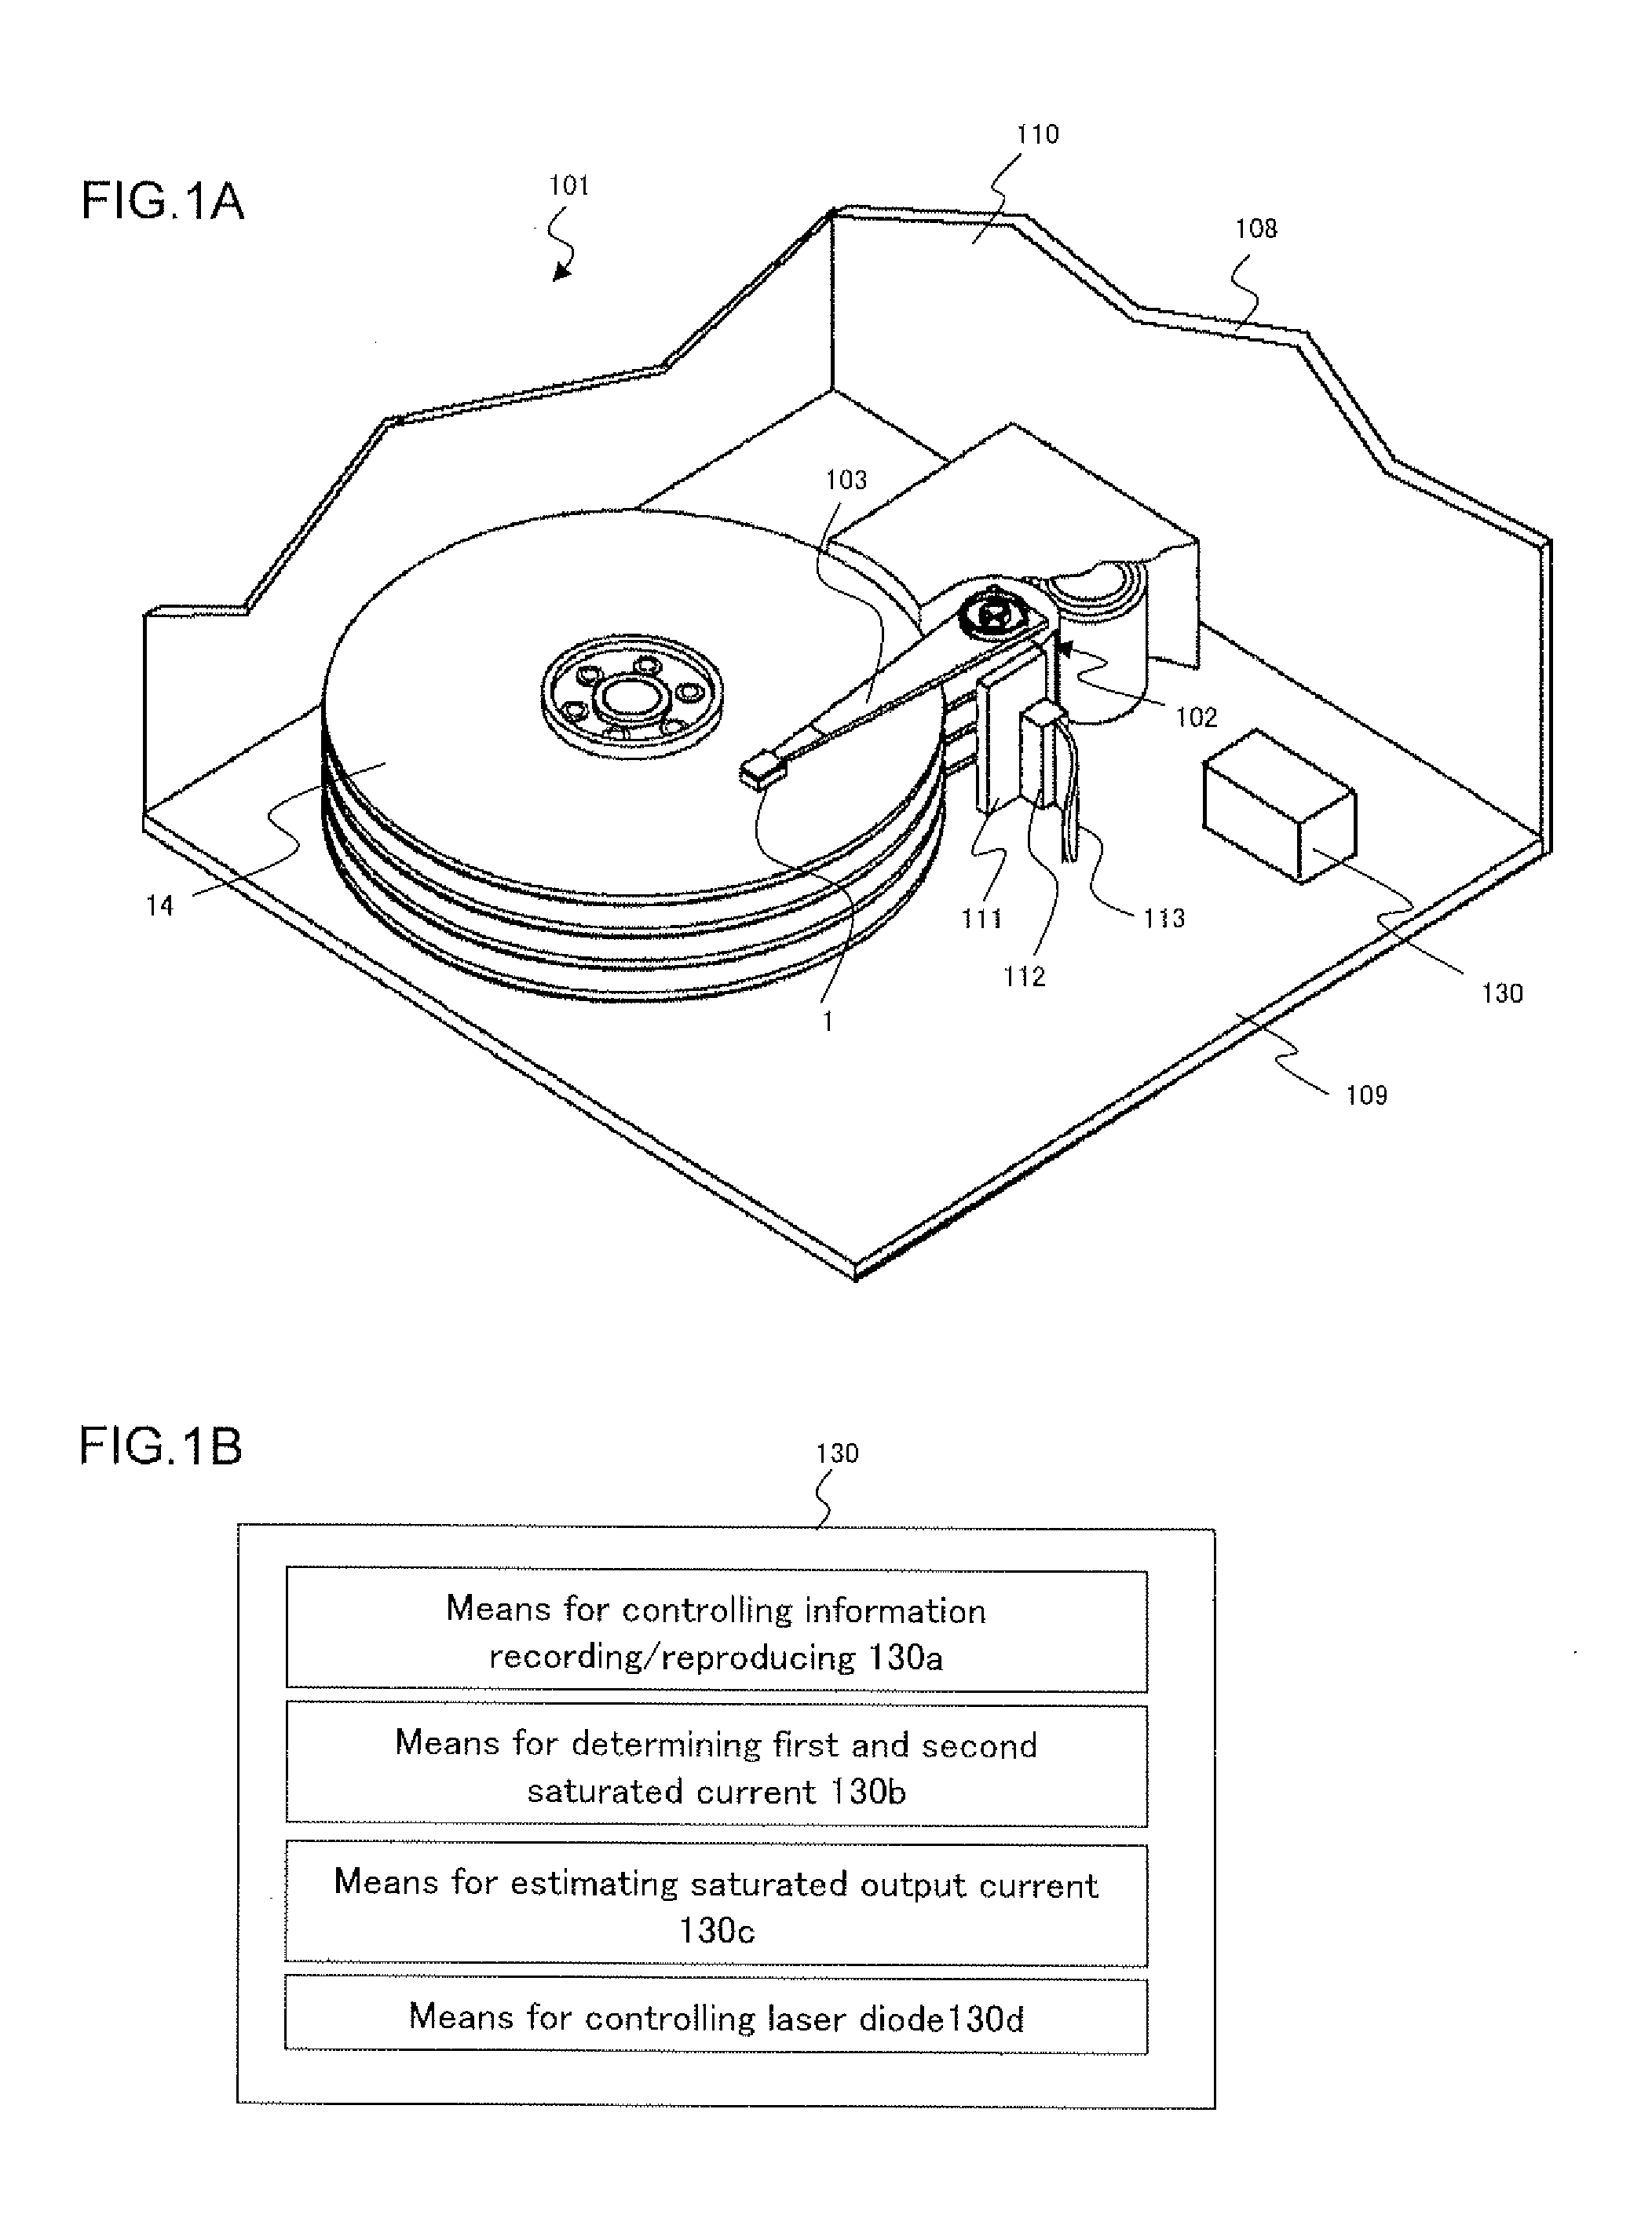 Hard disk drive apparatus with thermally assisted head